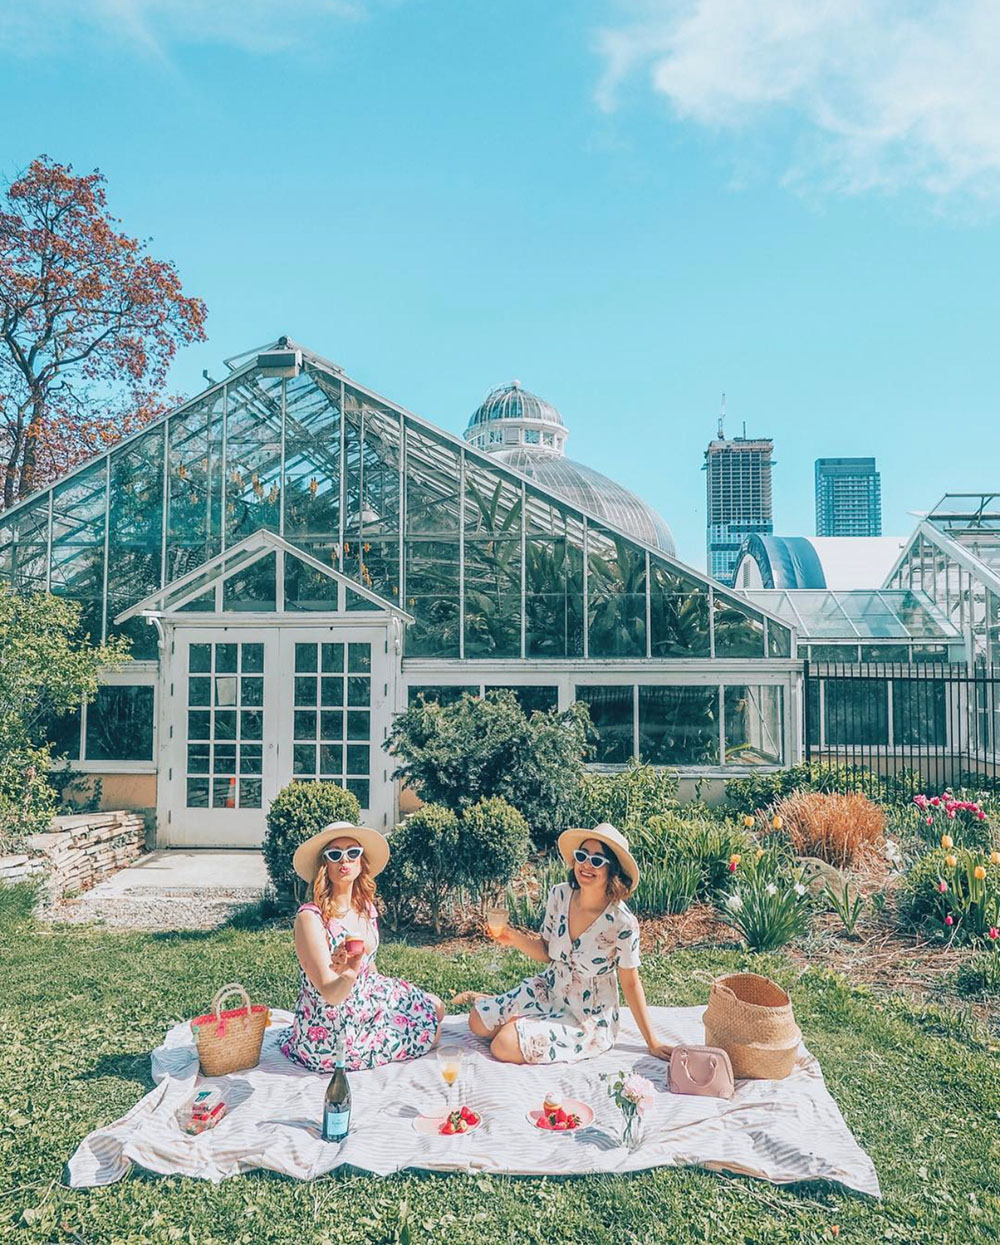 If you're planning on visiting Toronto soon and hoping to get some great photos while you're there, you definitely don't want to miss this guide on the most instagrammable places in Toronto, outdoor edition! This guide features all sorts of incredible outdoor photography locations in Toronto and the GTA. Pictured here: Allan Gardens